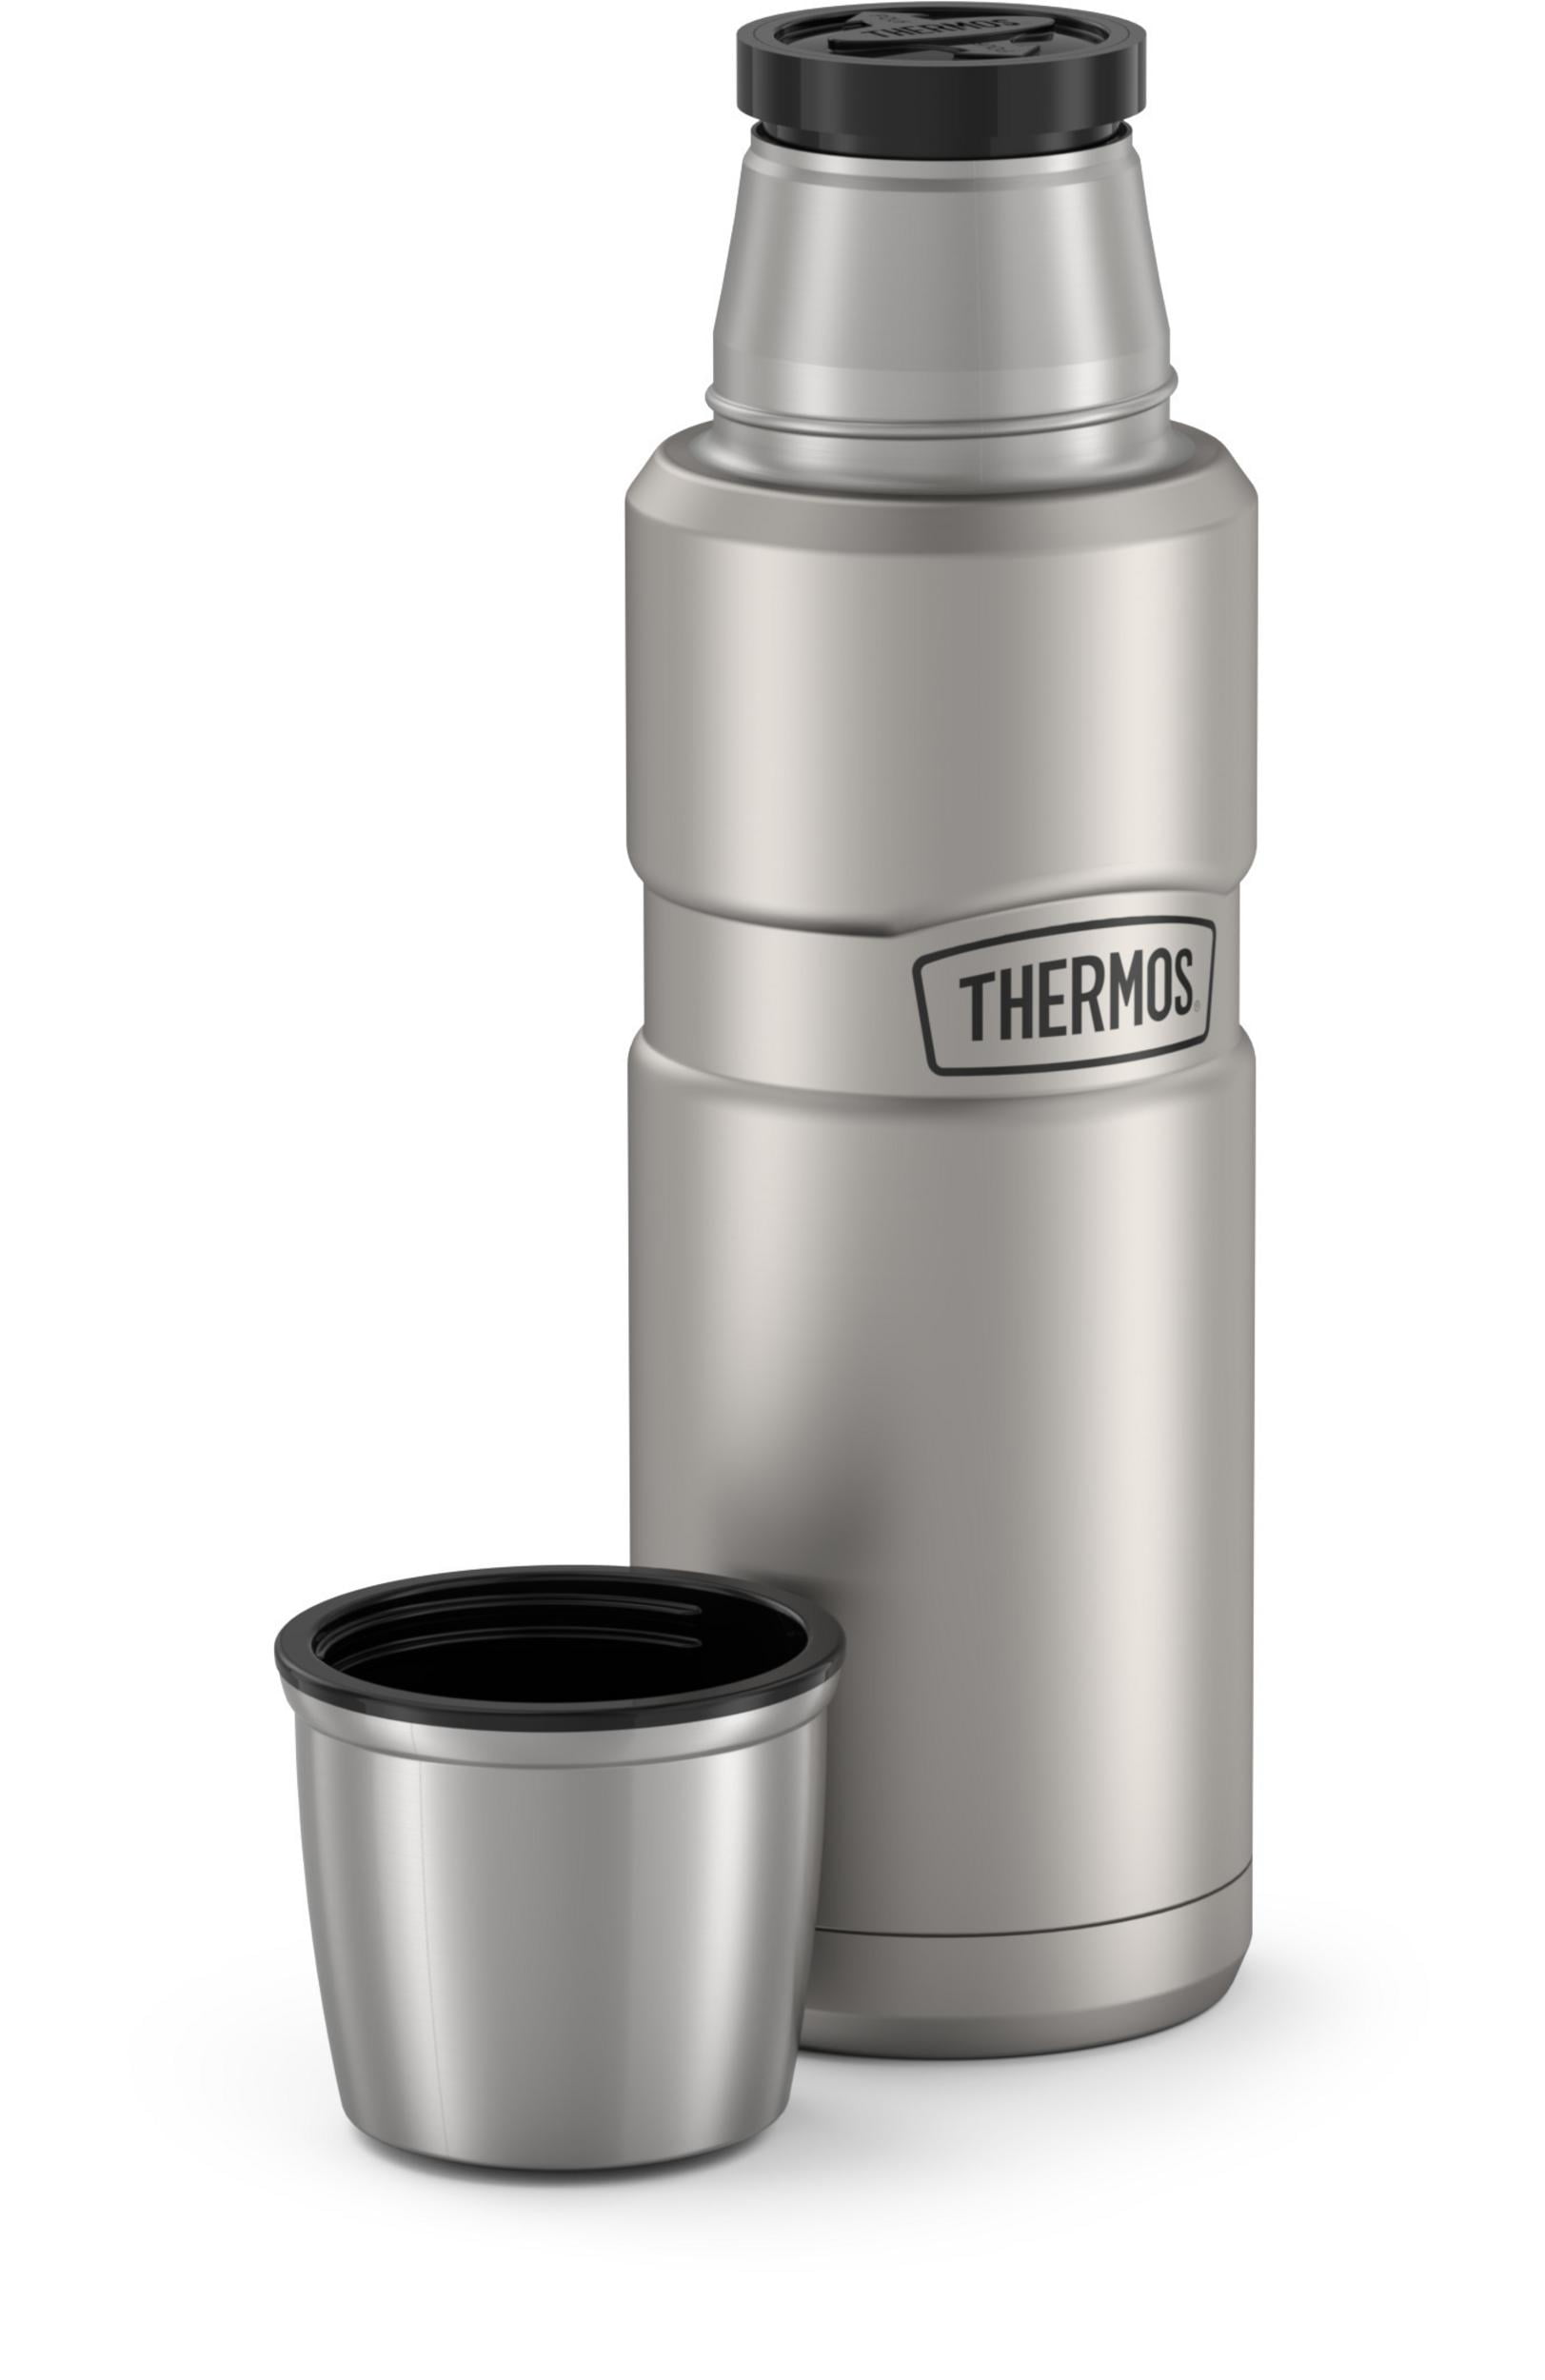 Thermos Vacuum Insulated 16 Ounce Compact Stainless Steel Beverage Bottle 